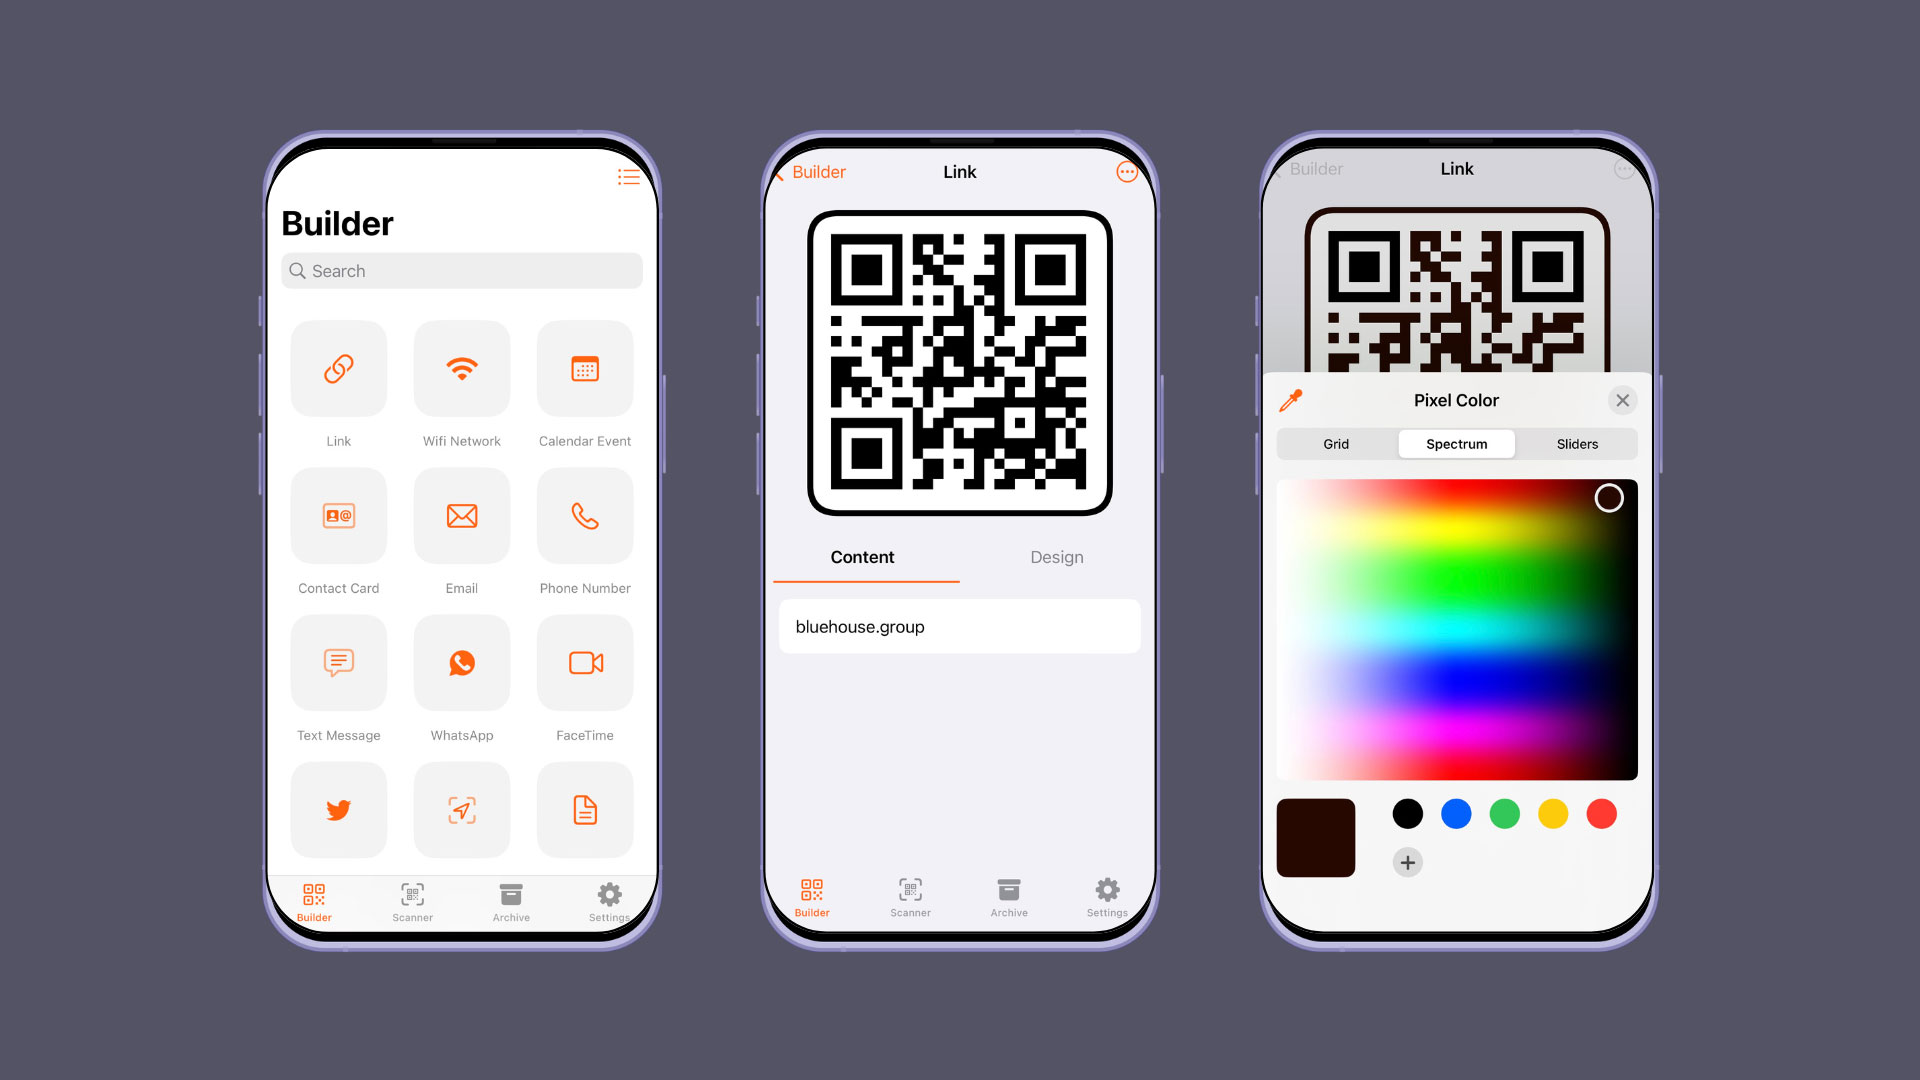 The image consists of three screenshots from the mobile app QR Pop. At the bottom of each screenshot, there is a navigation bar displaying icons for the Builder, Scanner, Archive, and settings.

The left-most screenshot showcases various QR code options, including Links, Wifi Networks, Calendar Events, Contact Cards, Emails, Phone Numbers, Text Messages, Whatsapp, Facetime, and more. Each QR code type is represented by an orange-colored symbol.

The middle screenshot displays a basic black QR code that links to Bluehouse.Group. The interface includes a tab for viewing the QR code and another tab for designing it.

The right-most screenshot demonstrates the QR code design feature. In this particular instance, the app allows users to customize the pixel color of the QR code.